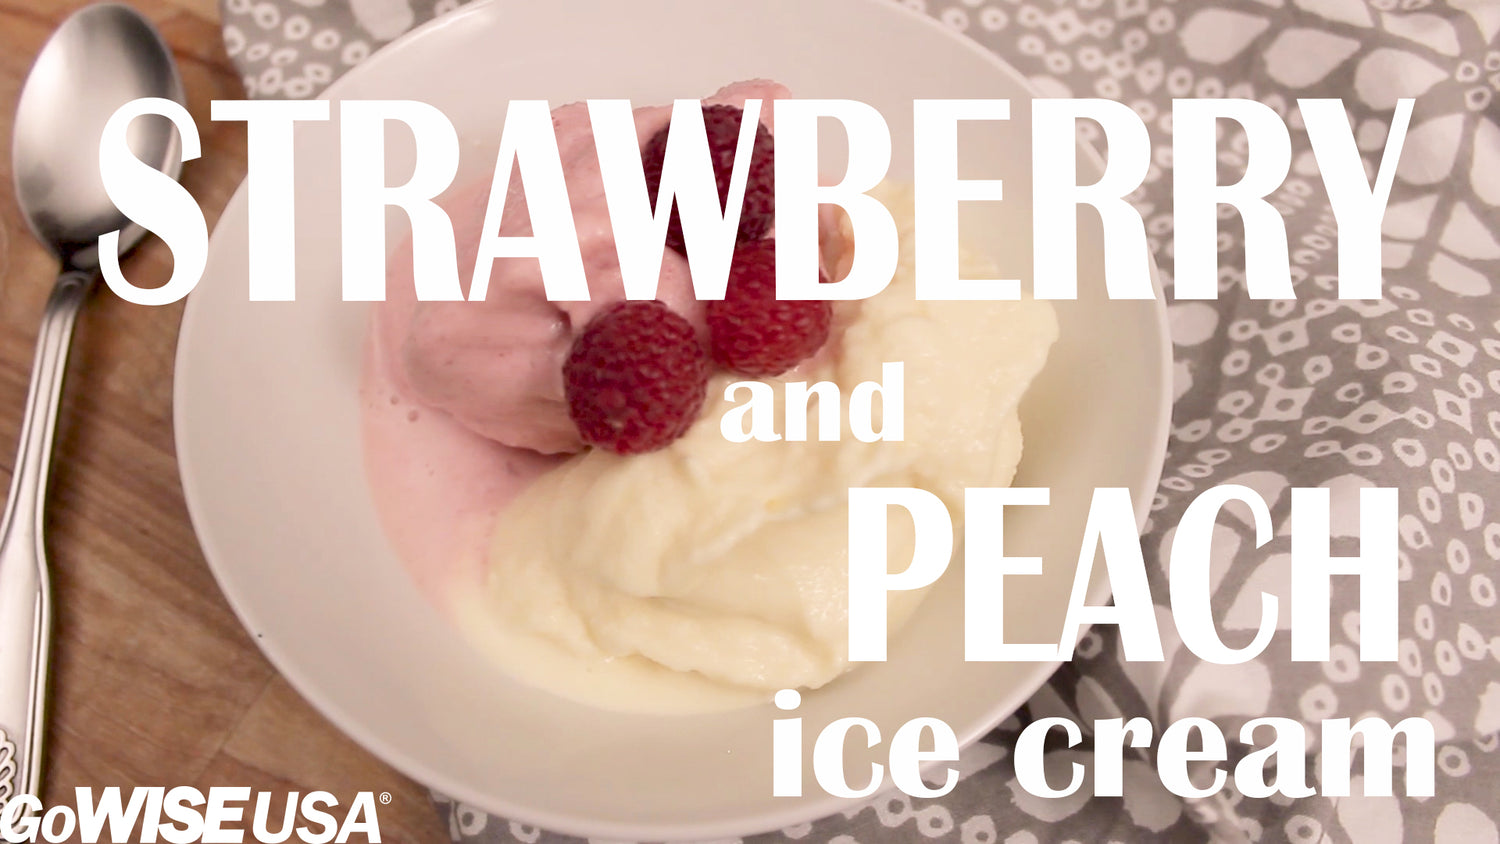 How to Make Strawberry and Peach Ice Cream in a Blender